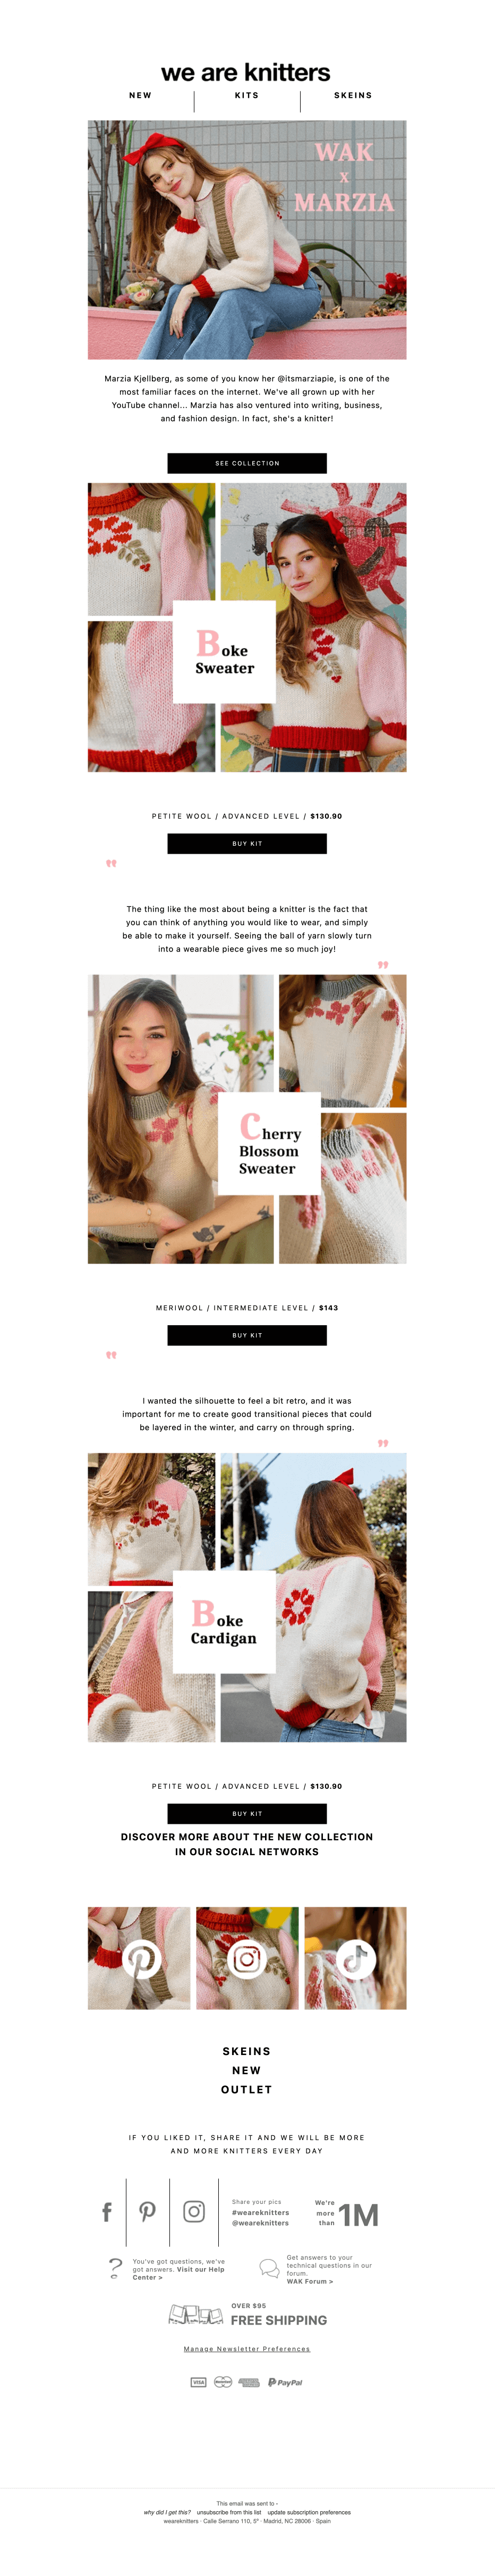 Influencer email from We Are Knitters